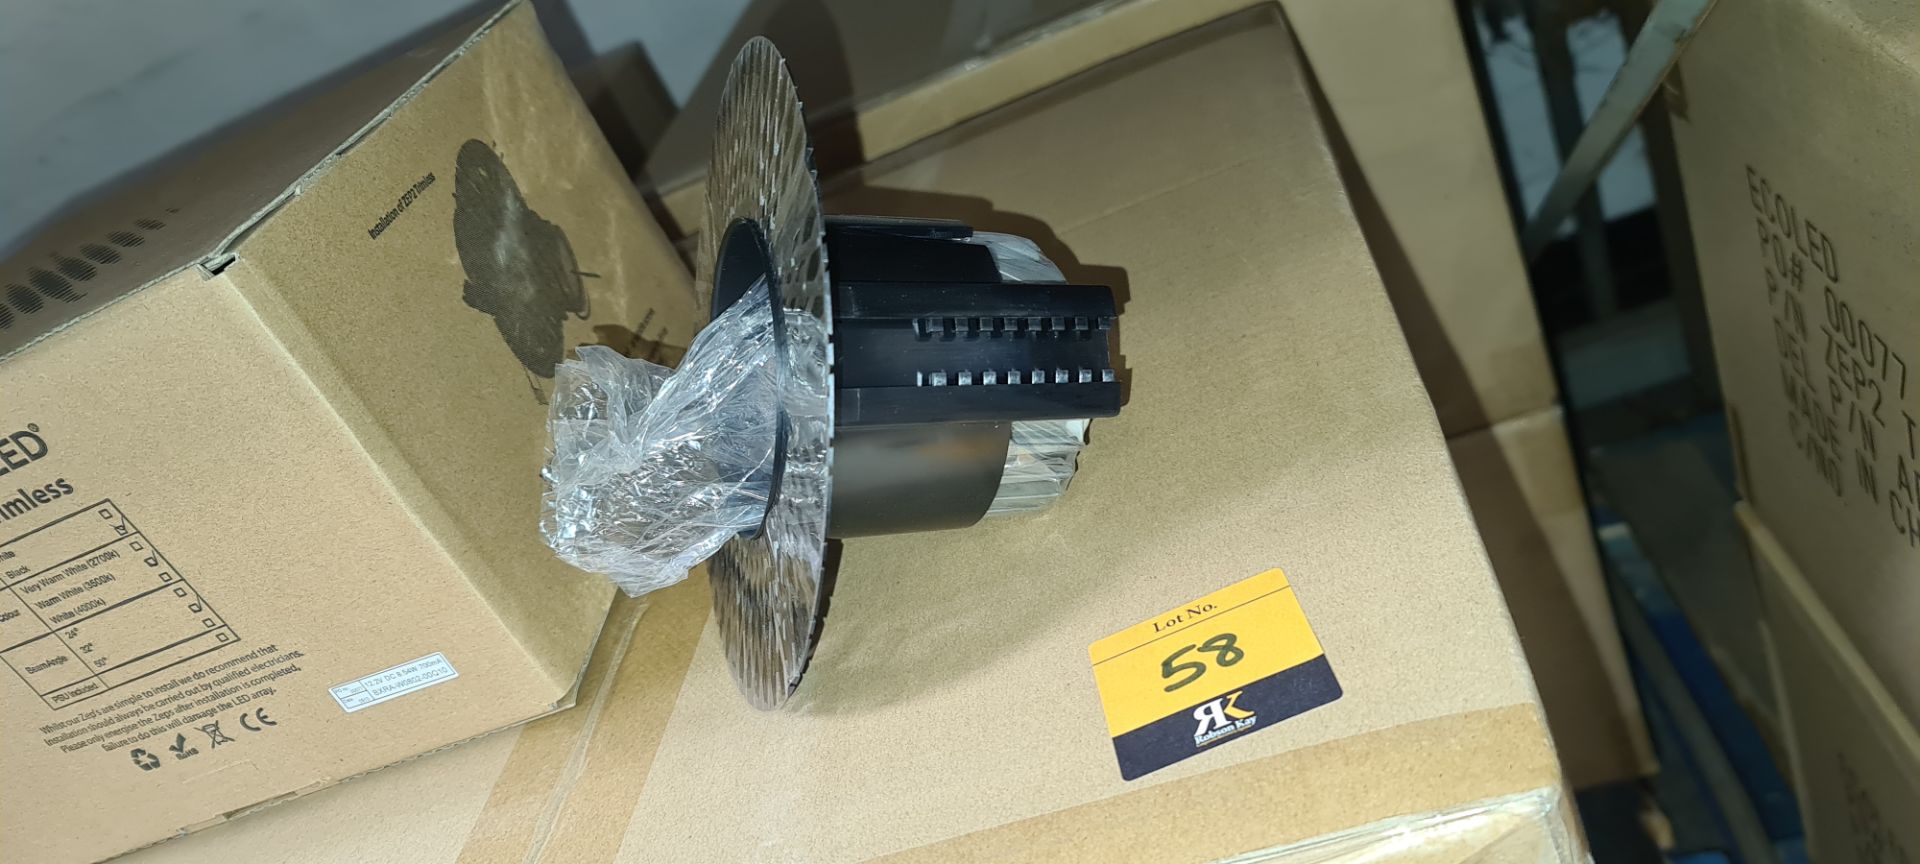 32 off downlights with trimless collars, in black, 3500K, 32° beam angle, product code ZEP2TL32W/W. - Image 6 of 10